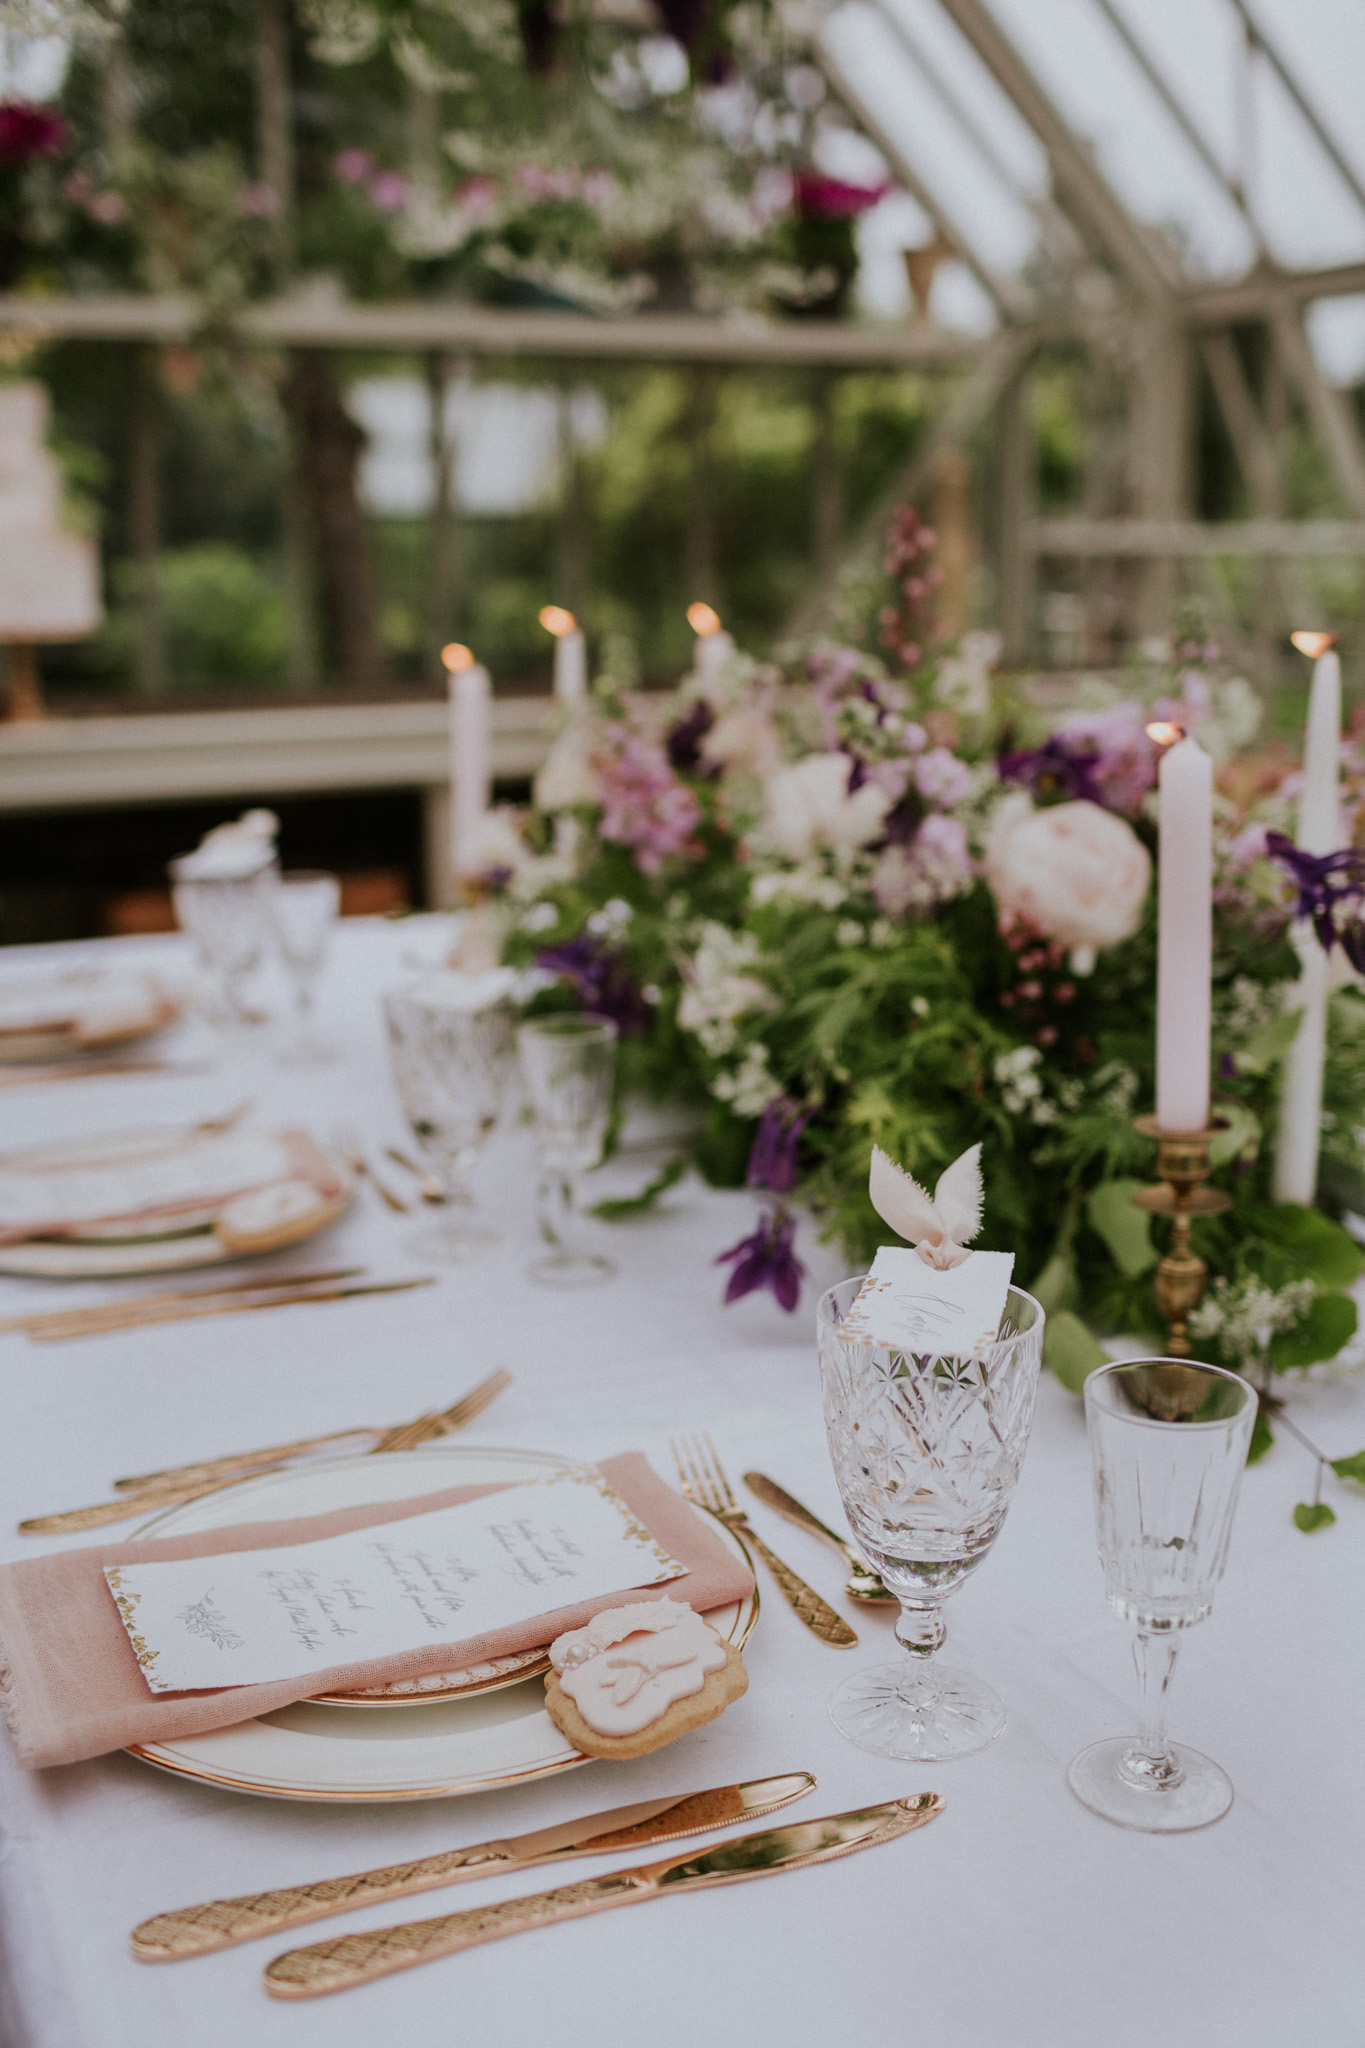 Romantic wedding table with touches of blush and gold. Photo by Maja Tsolo